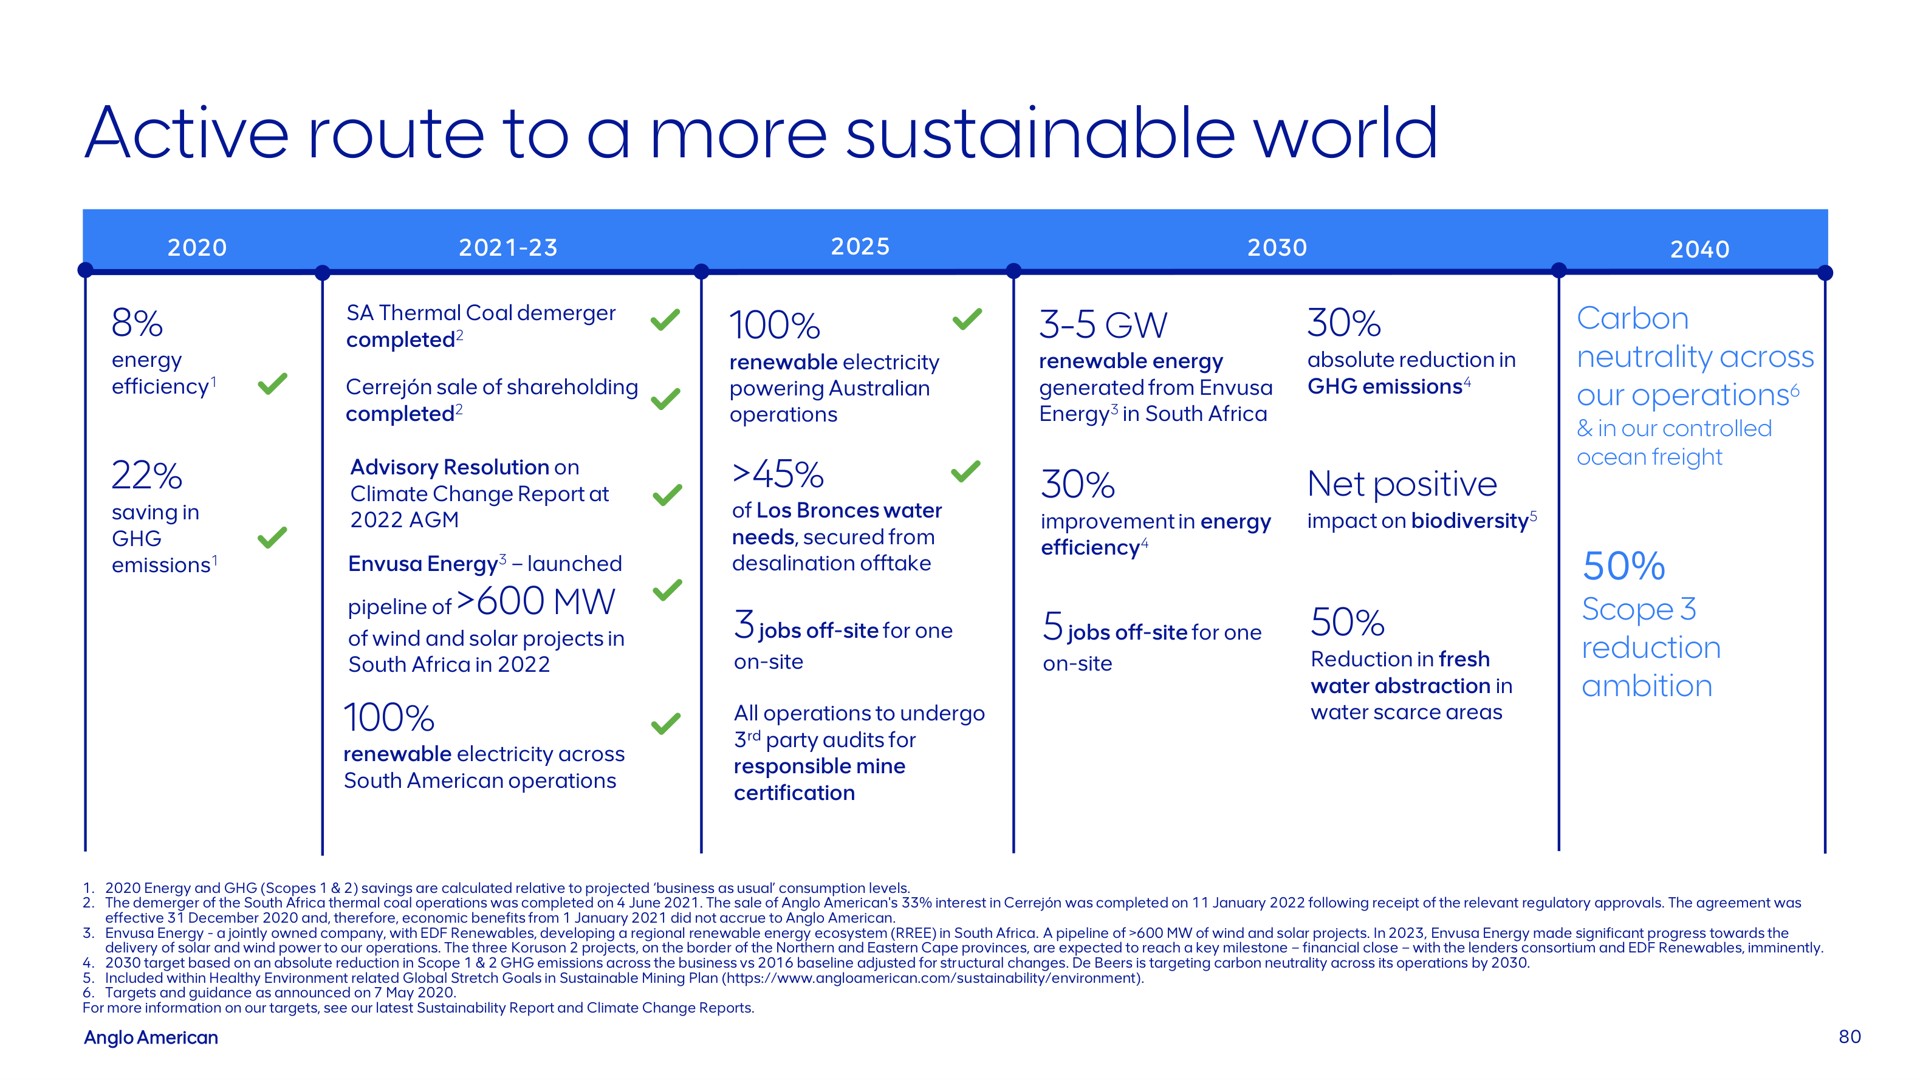 active route to a more sustainable world | AngloAmerican